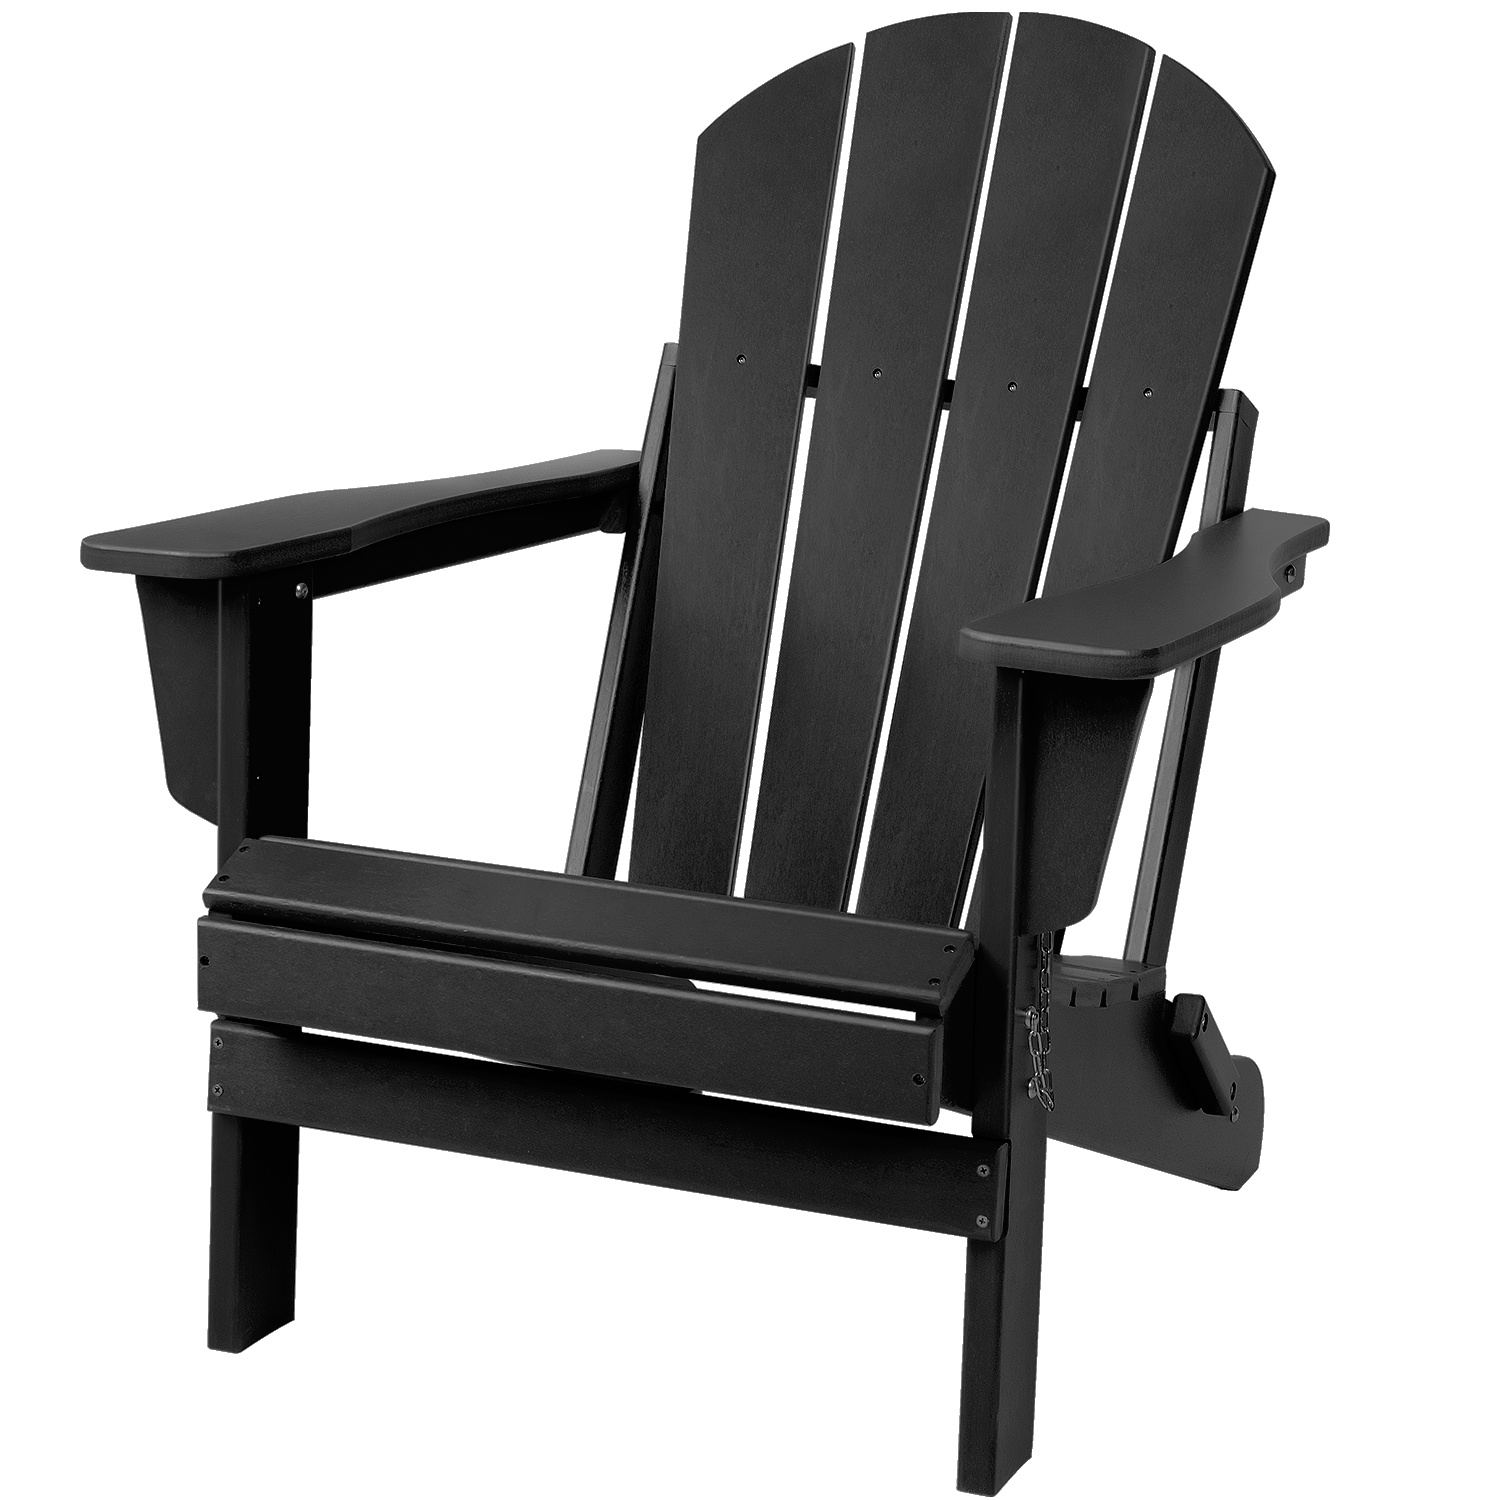 Lacoo Folding Adirondack Chair All Weather Resistant Resin Outdoor Patio Chair, Black - image 1 of 7